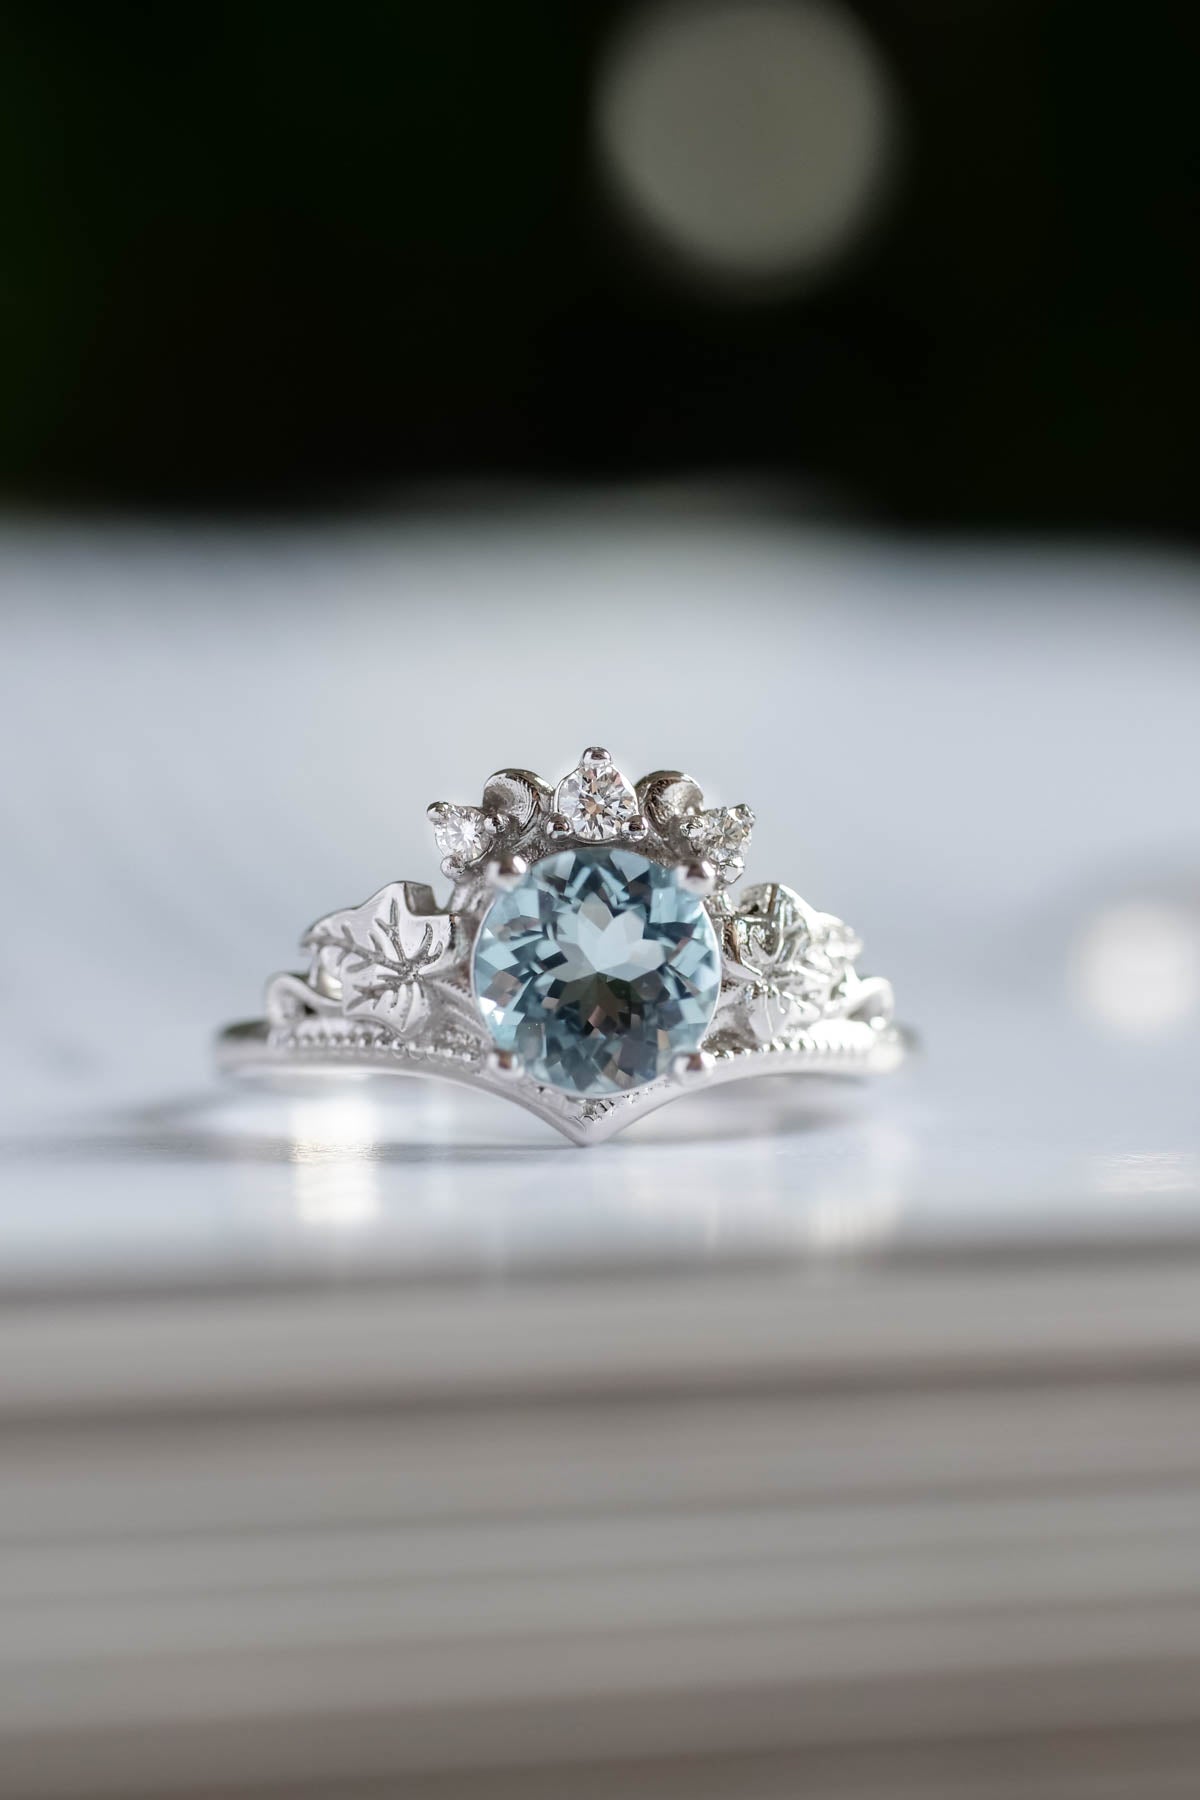 Aquamarine Engagement Rings for Marching Down the Aisle - JCK